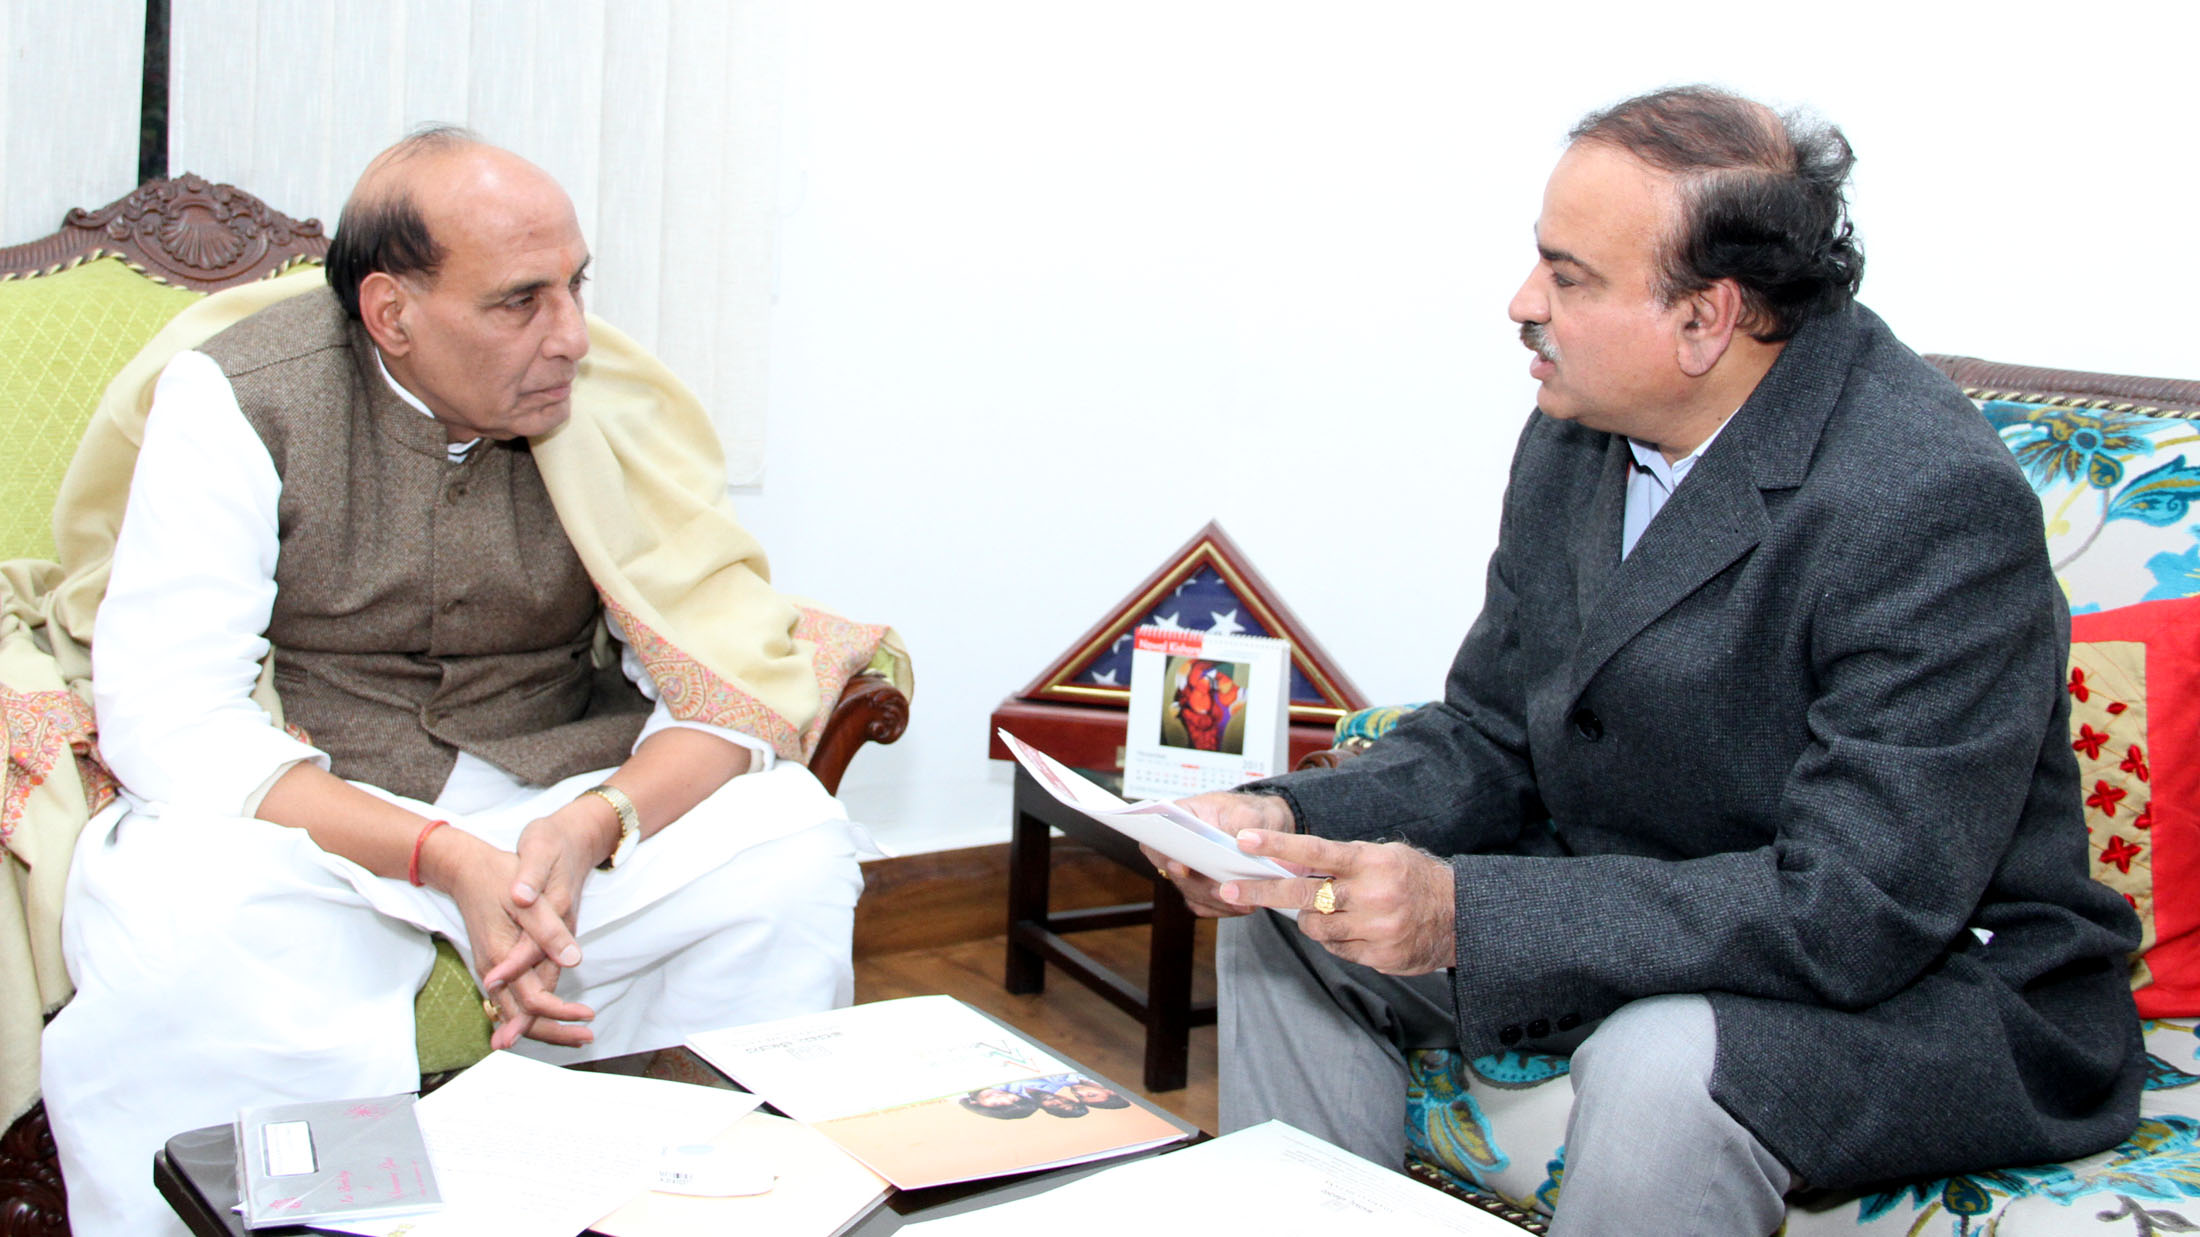 The Union Minister for Chemicals and Fertilizers, Shri Ananth Kumar calling on the Union Home Minister, Shri Rajnath Singh, in New Delhi on December 24, 2015.